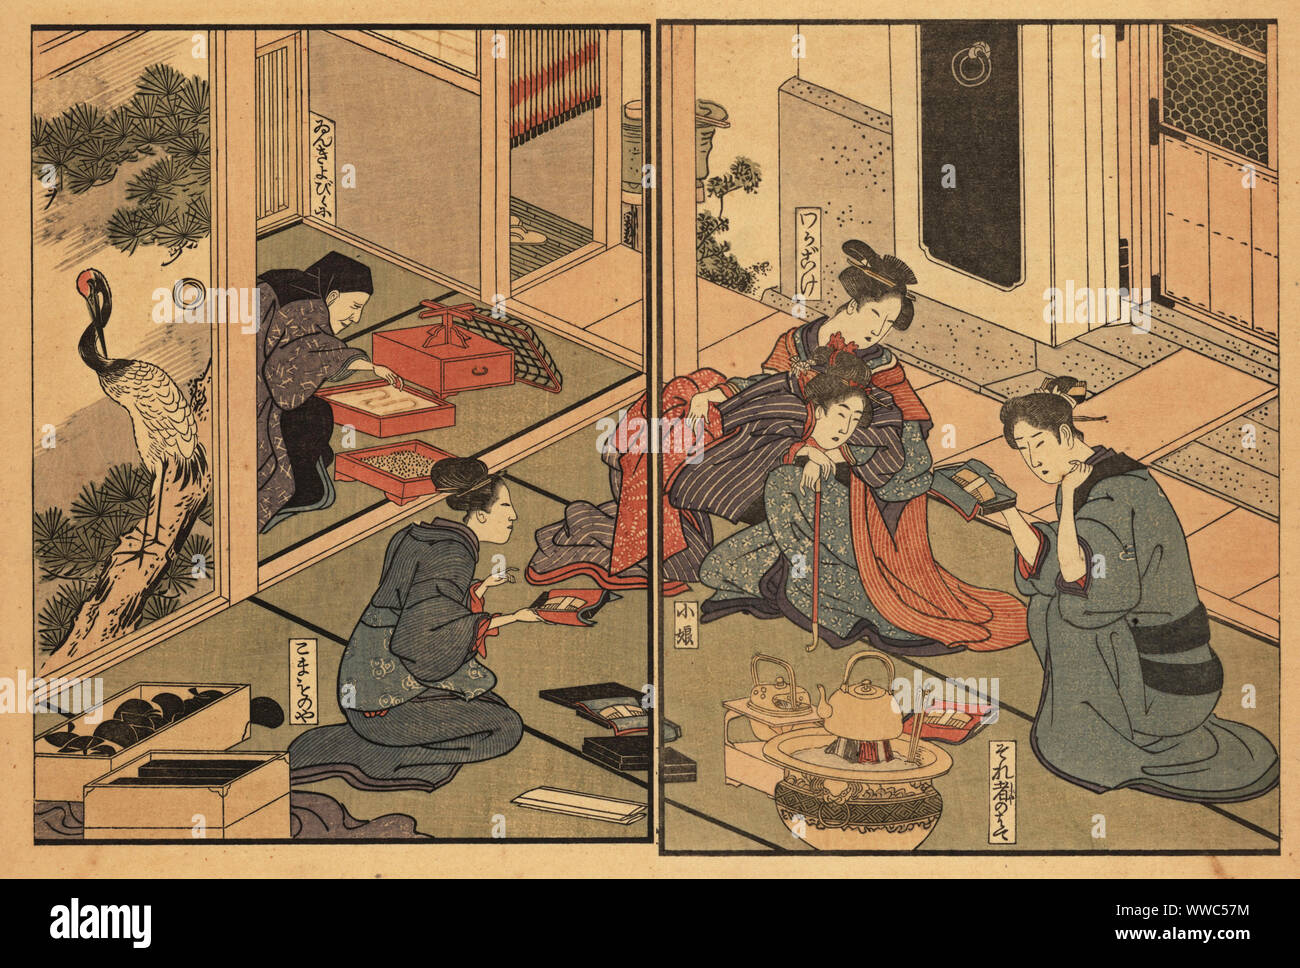 A cosmetics and accessories seller making a house call. The customers are a geisha madam and two young geisha in an okiya. Handcoloured ukiyo-e woodblock print by Toyokuni Utagawa from Shikitei Sanba’s Ehon Imayo Sugata (Picture Book of the Modern Forms and Figures, Tokyo, 1916. Reprint of the original from 1802. Stock Photo